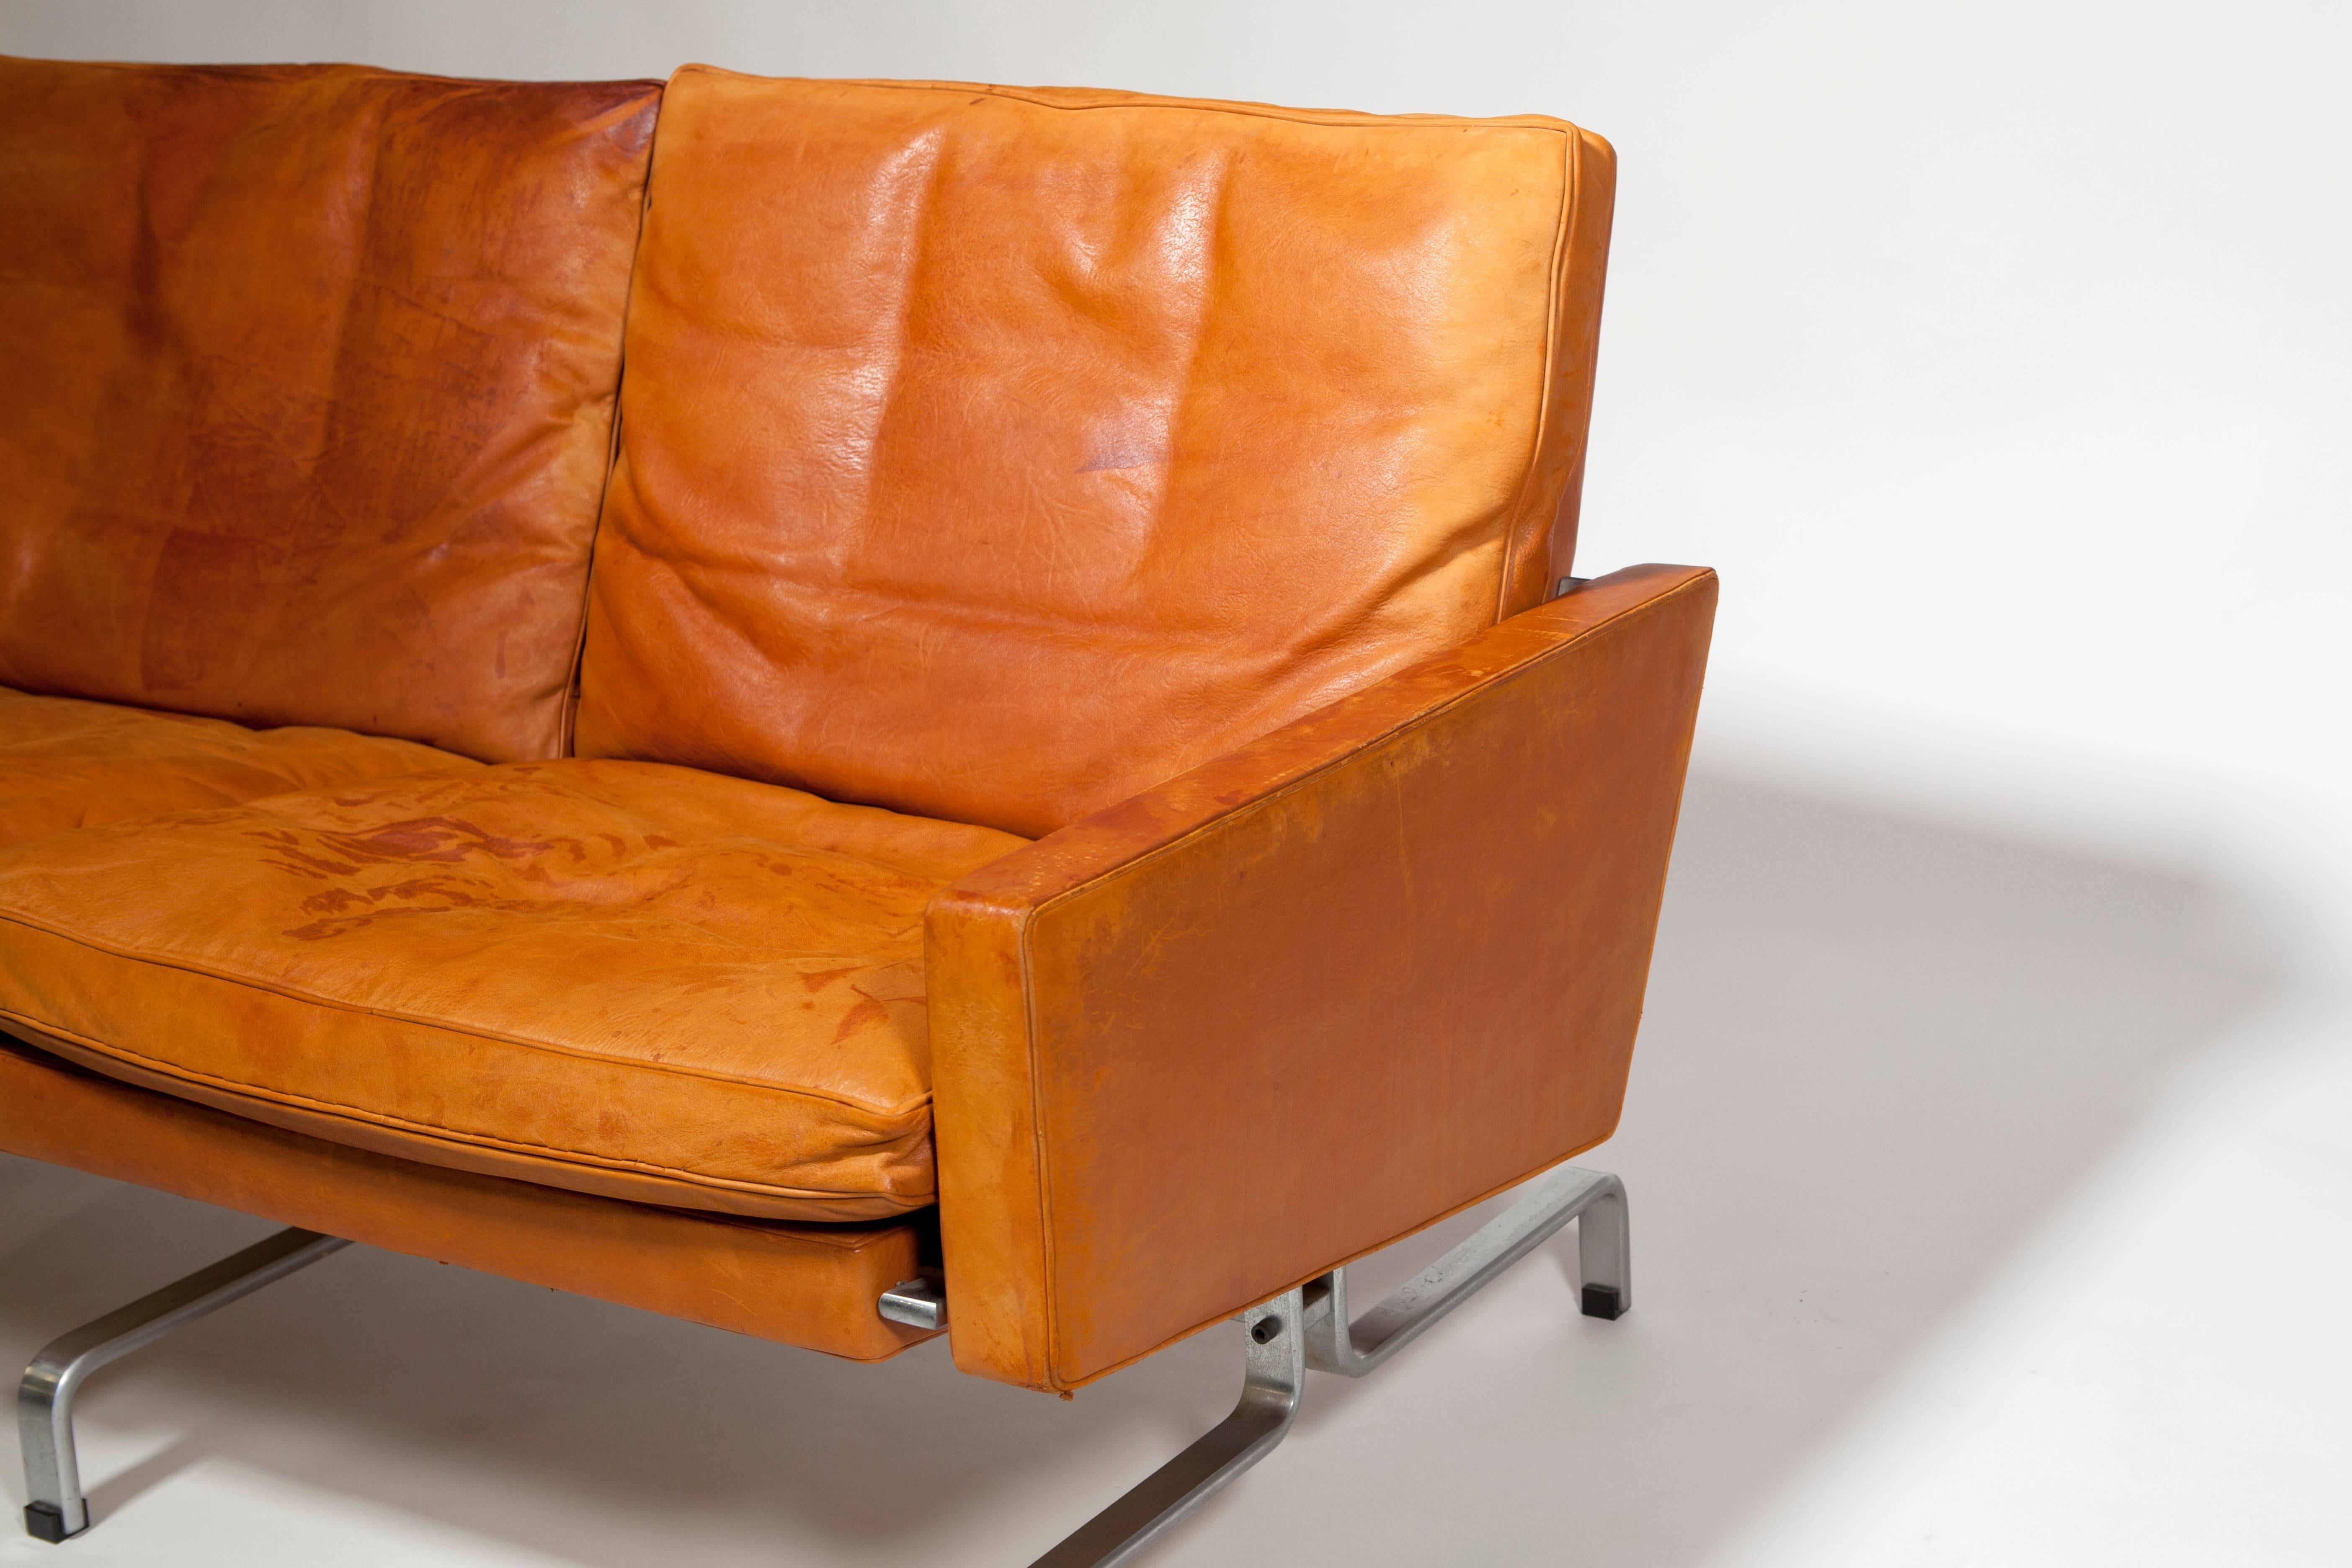 Poul Kjaerholm, Leather Sofa, Executed by E. Kold Christensen, circa 1958 In Excellent Condition For Sale In Amstelveen, NL